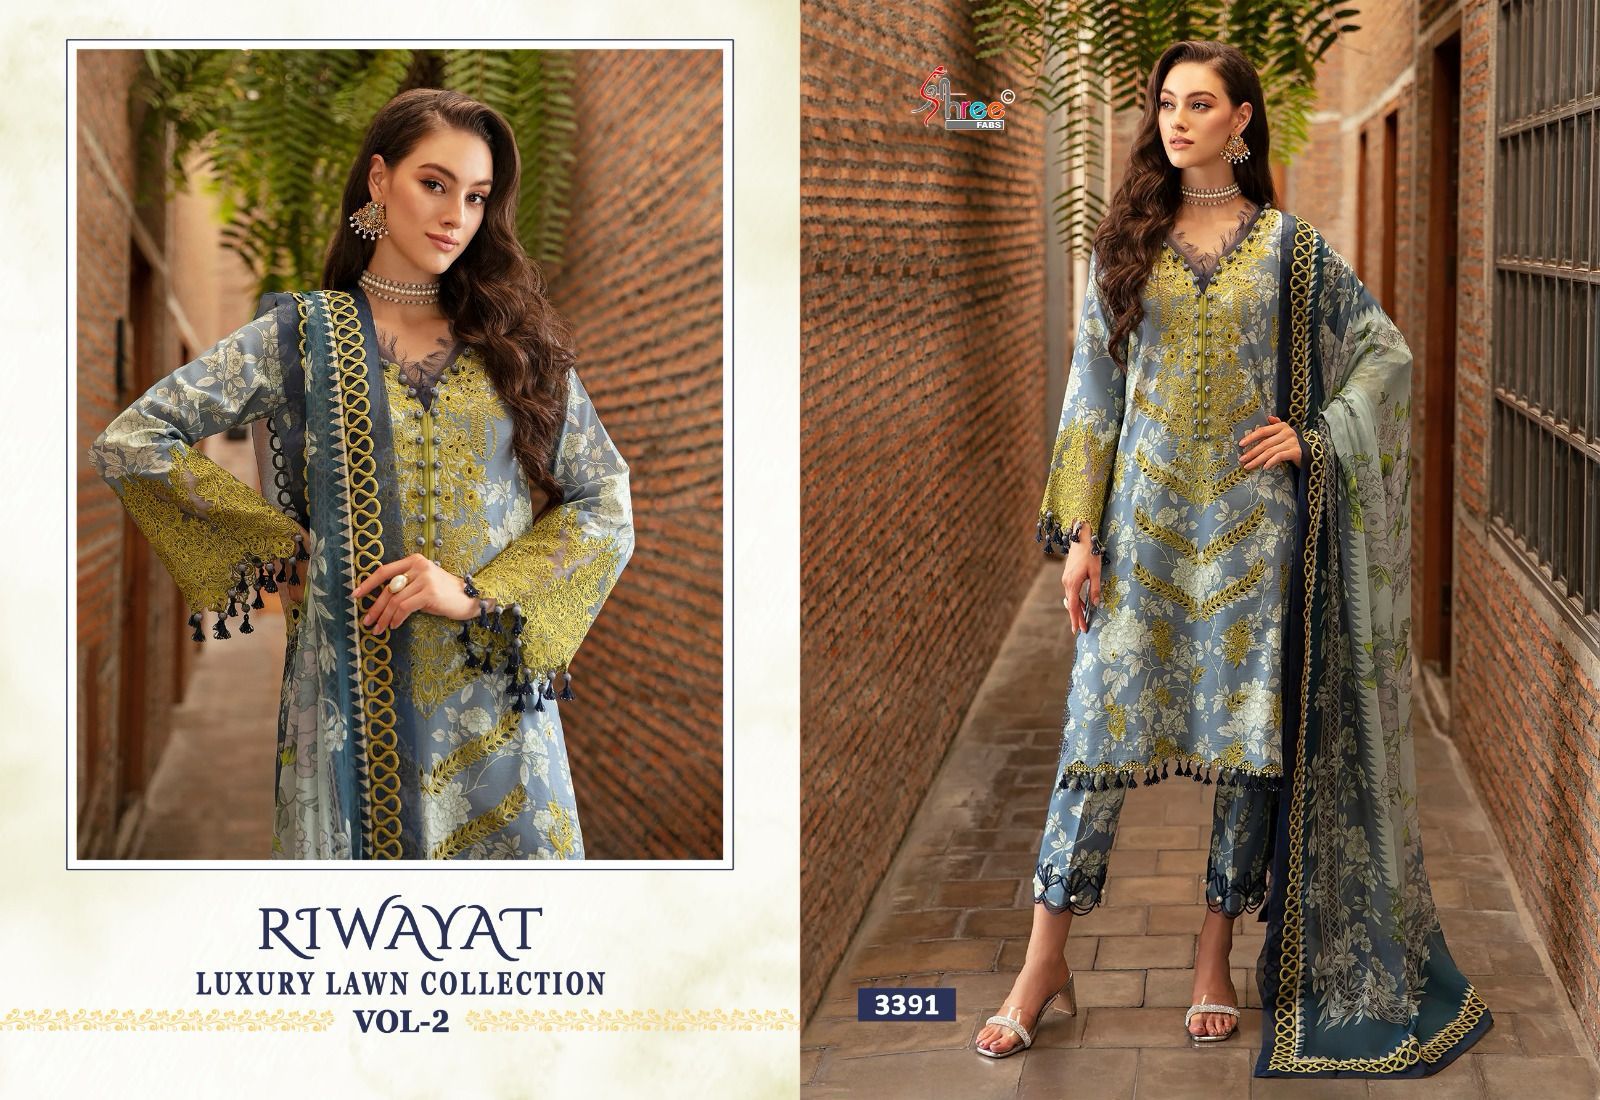 Shree Riwayat Luxury Lawn Collection Vol 2 collection 4